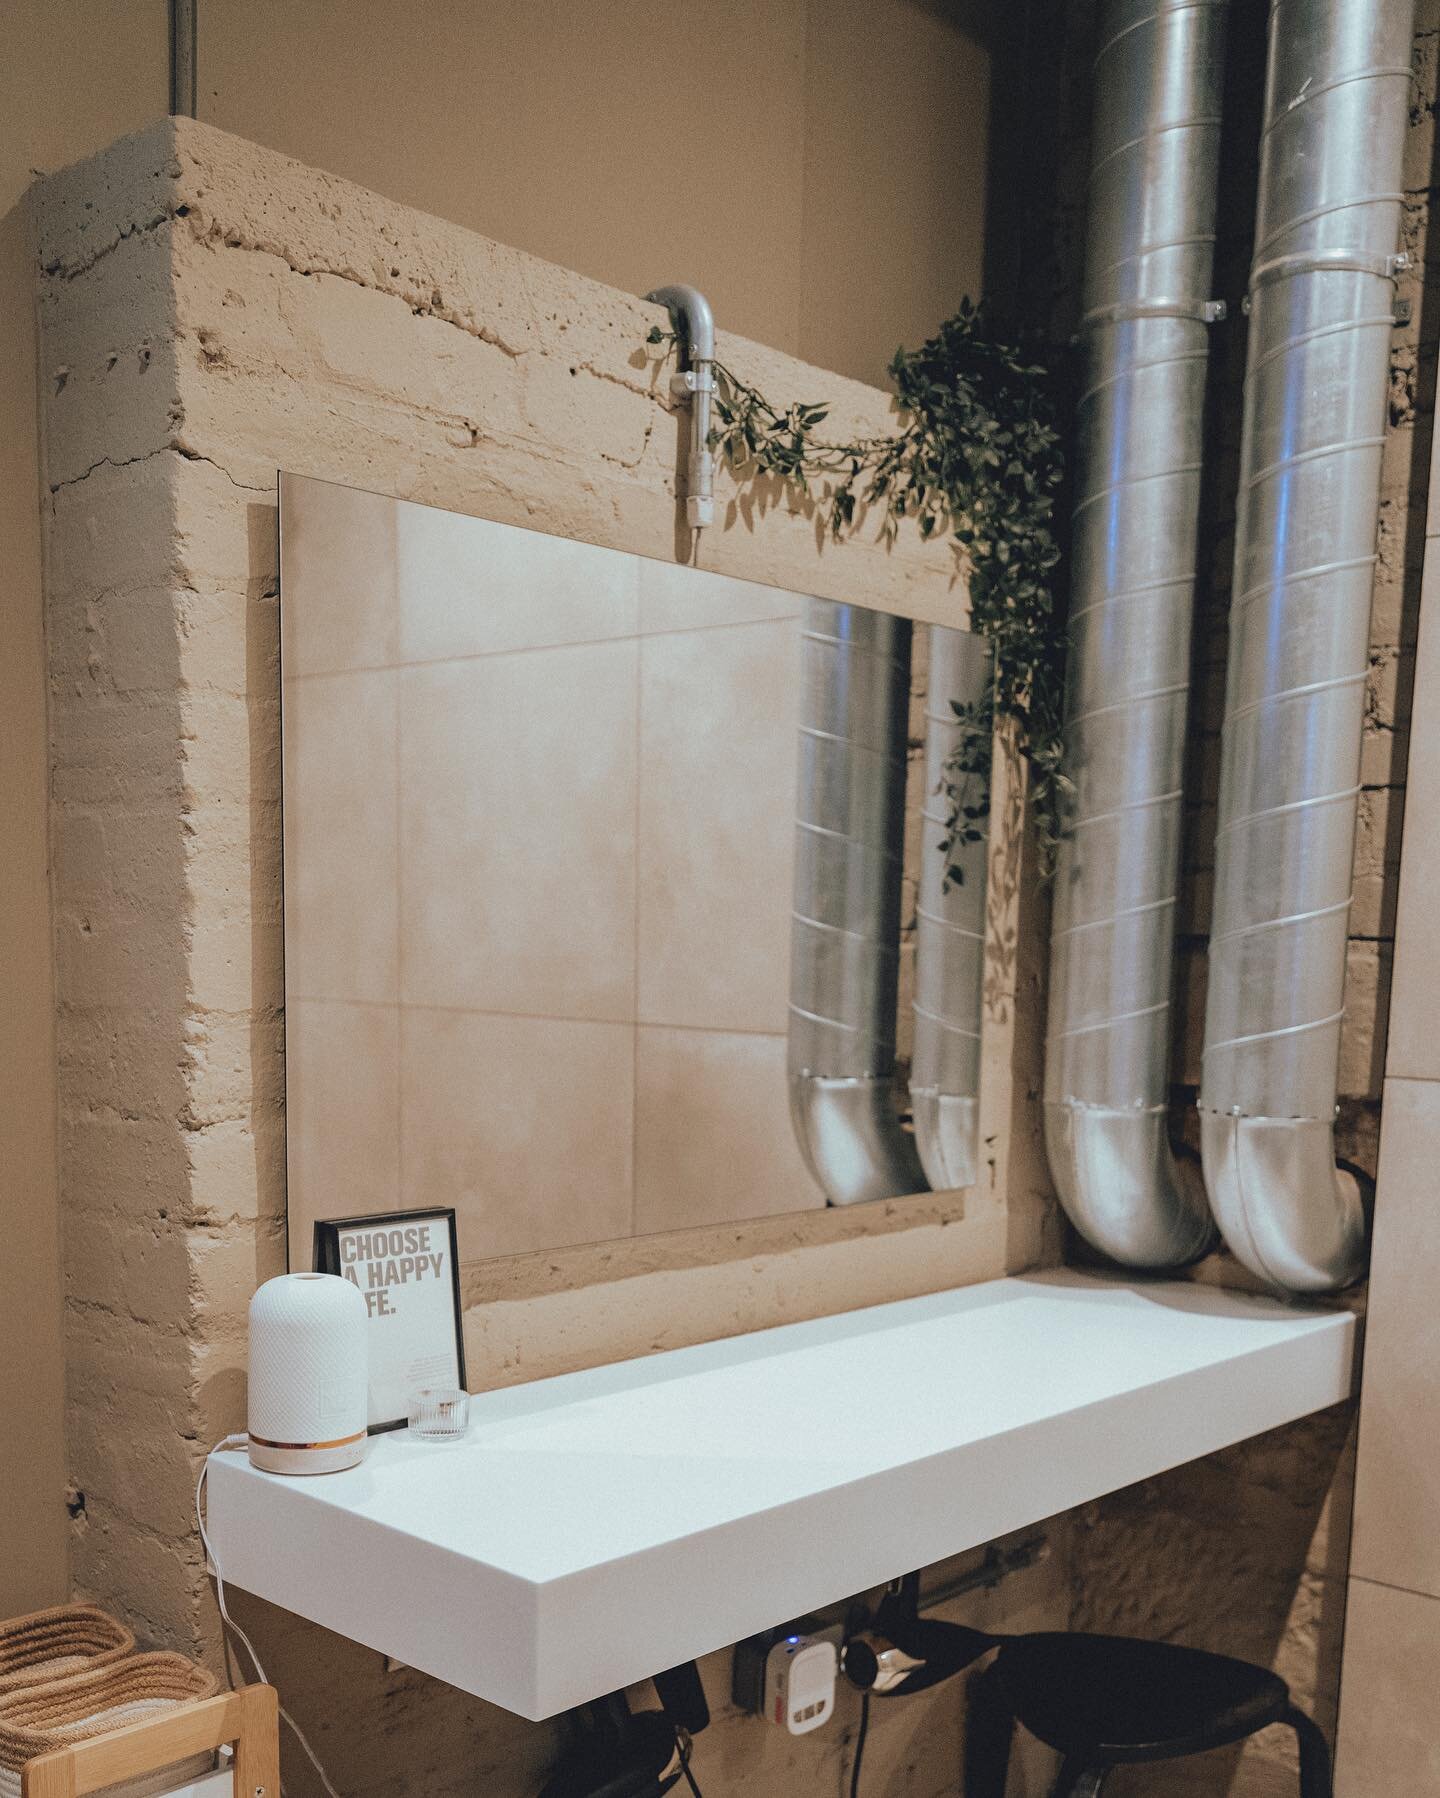 🧼🚿 One of our most common questions from prospective new members is &lsquo;do you have showers/changing facilities?&rsquo; YES. WE. DO. 

Some recent reviews have said SPACE smells like a spa. We&rsquo;ll let you judge that one for yourself 👀 Hair